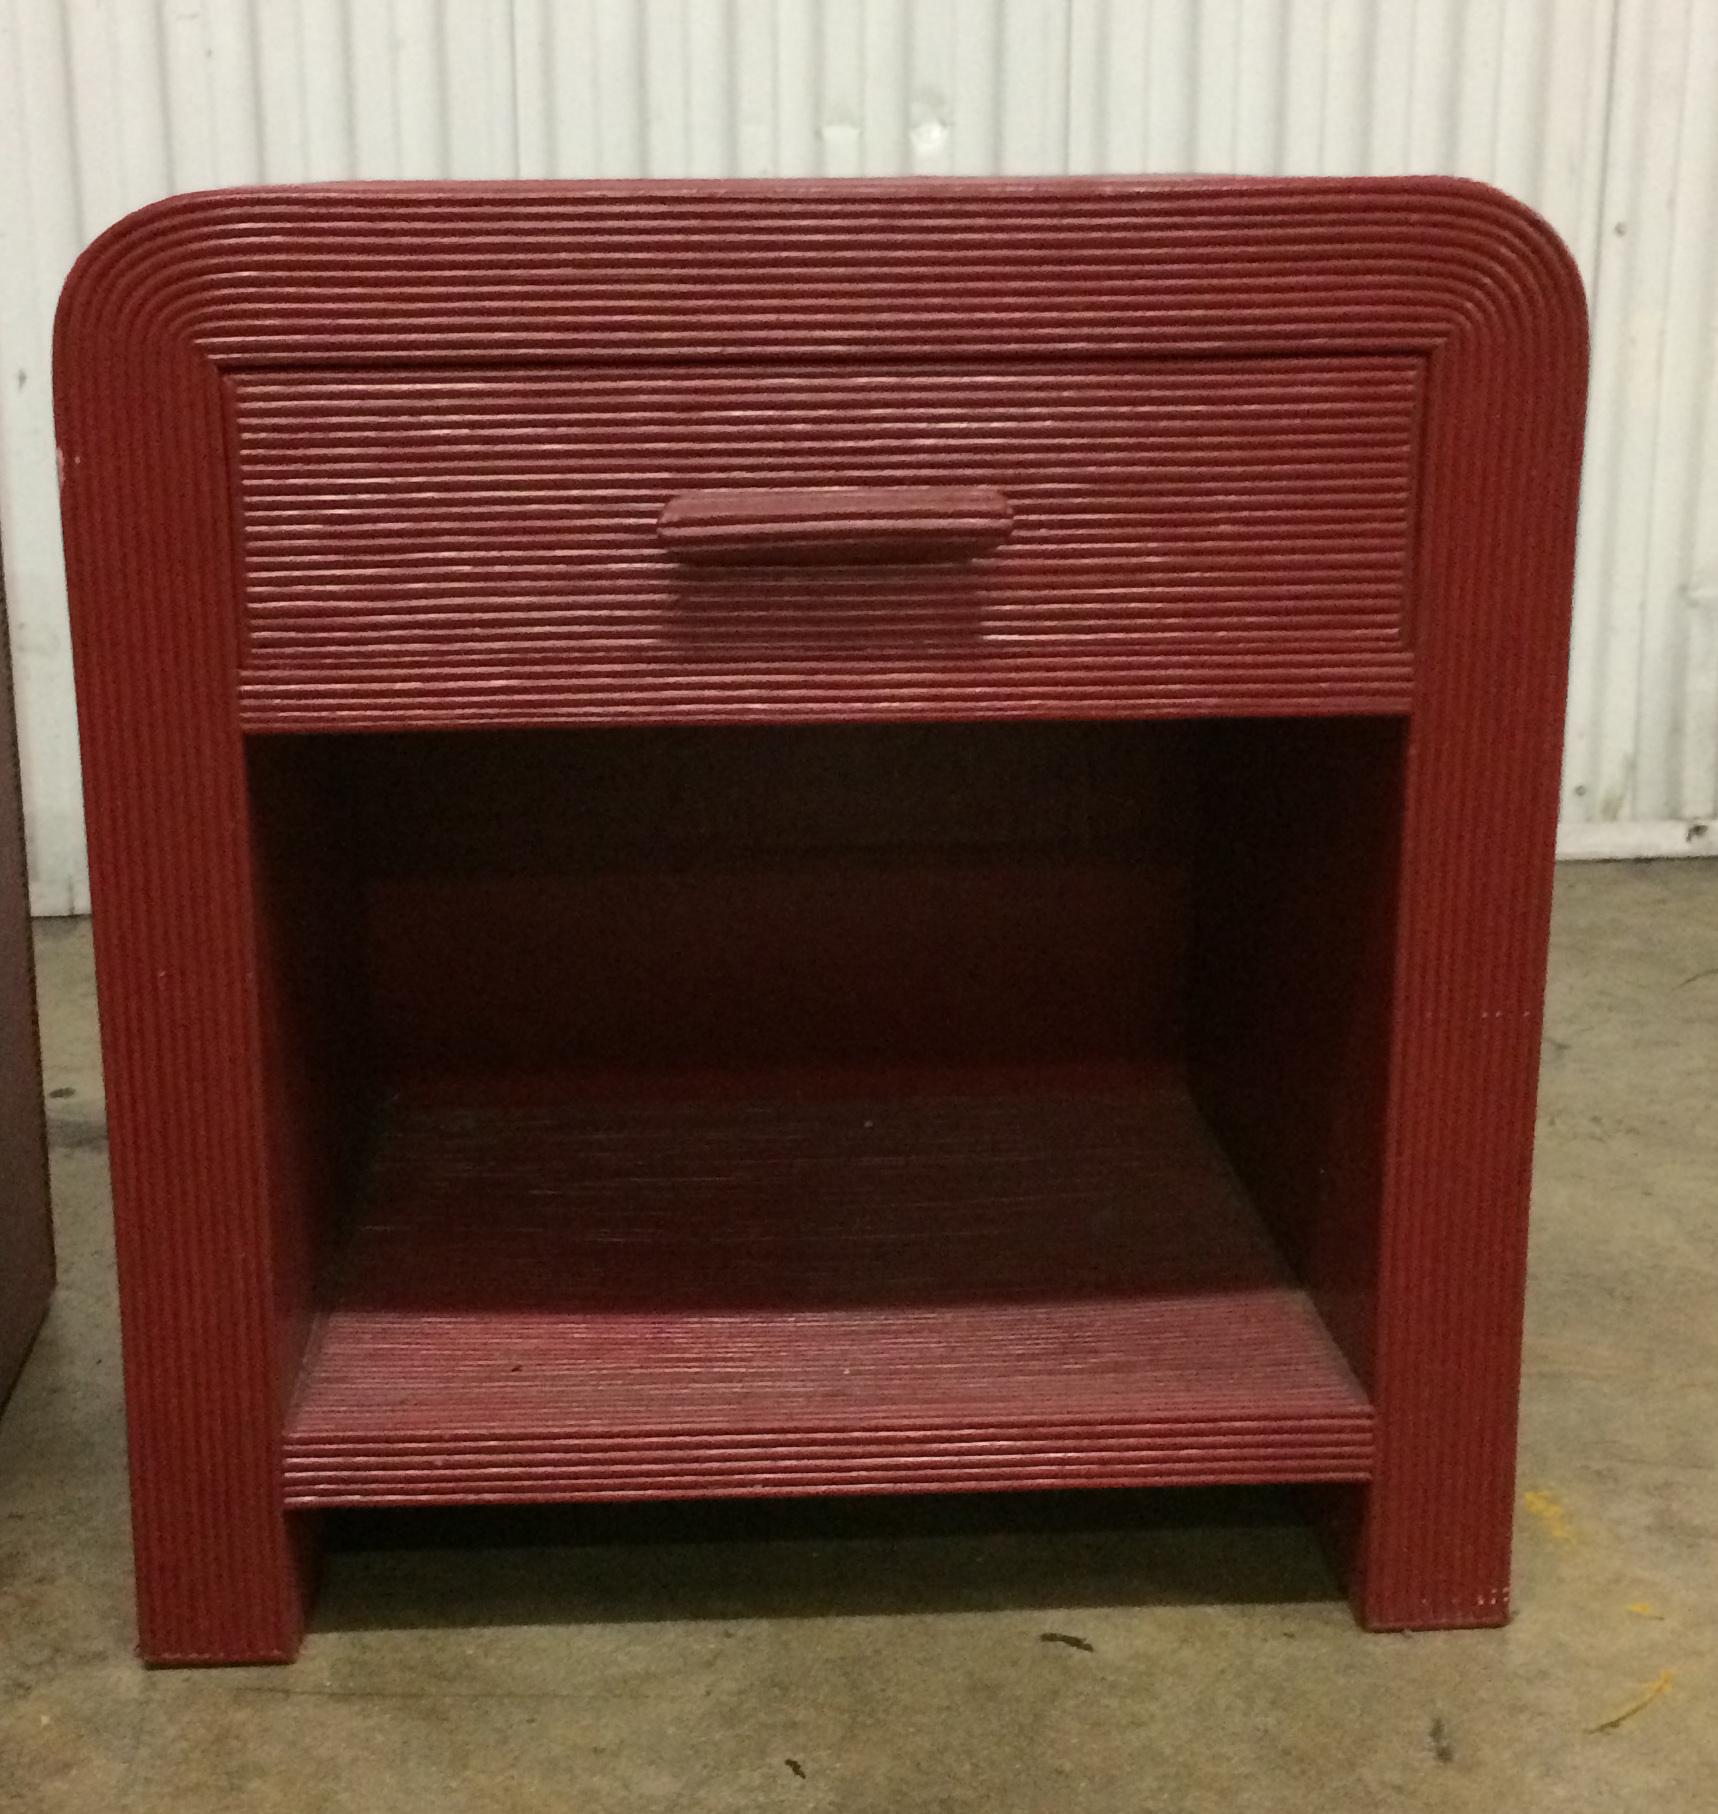 From the 1980s pencil reed rattan night stands or end tables. Very solid construction each with a single drawer with storage below. Vintage red Paint. Will go with many different styles from shabby chic, Bohemian or Hollywood Regency.